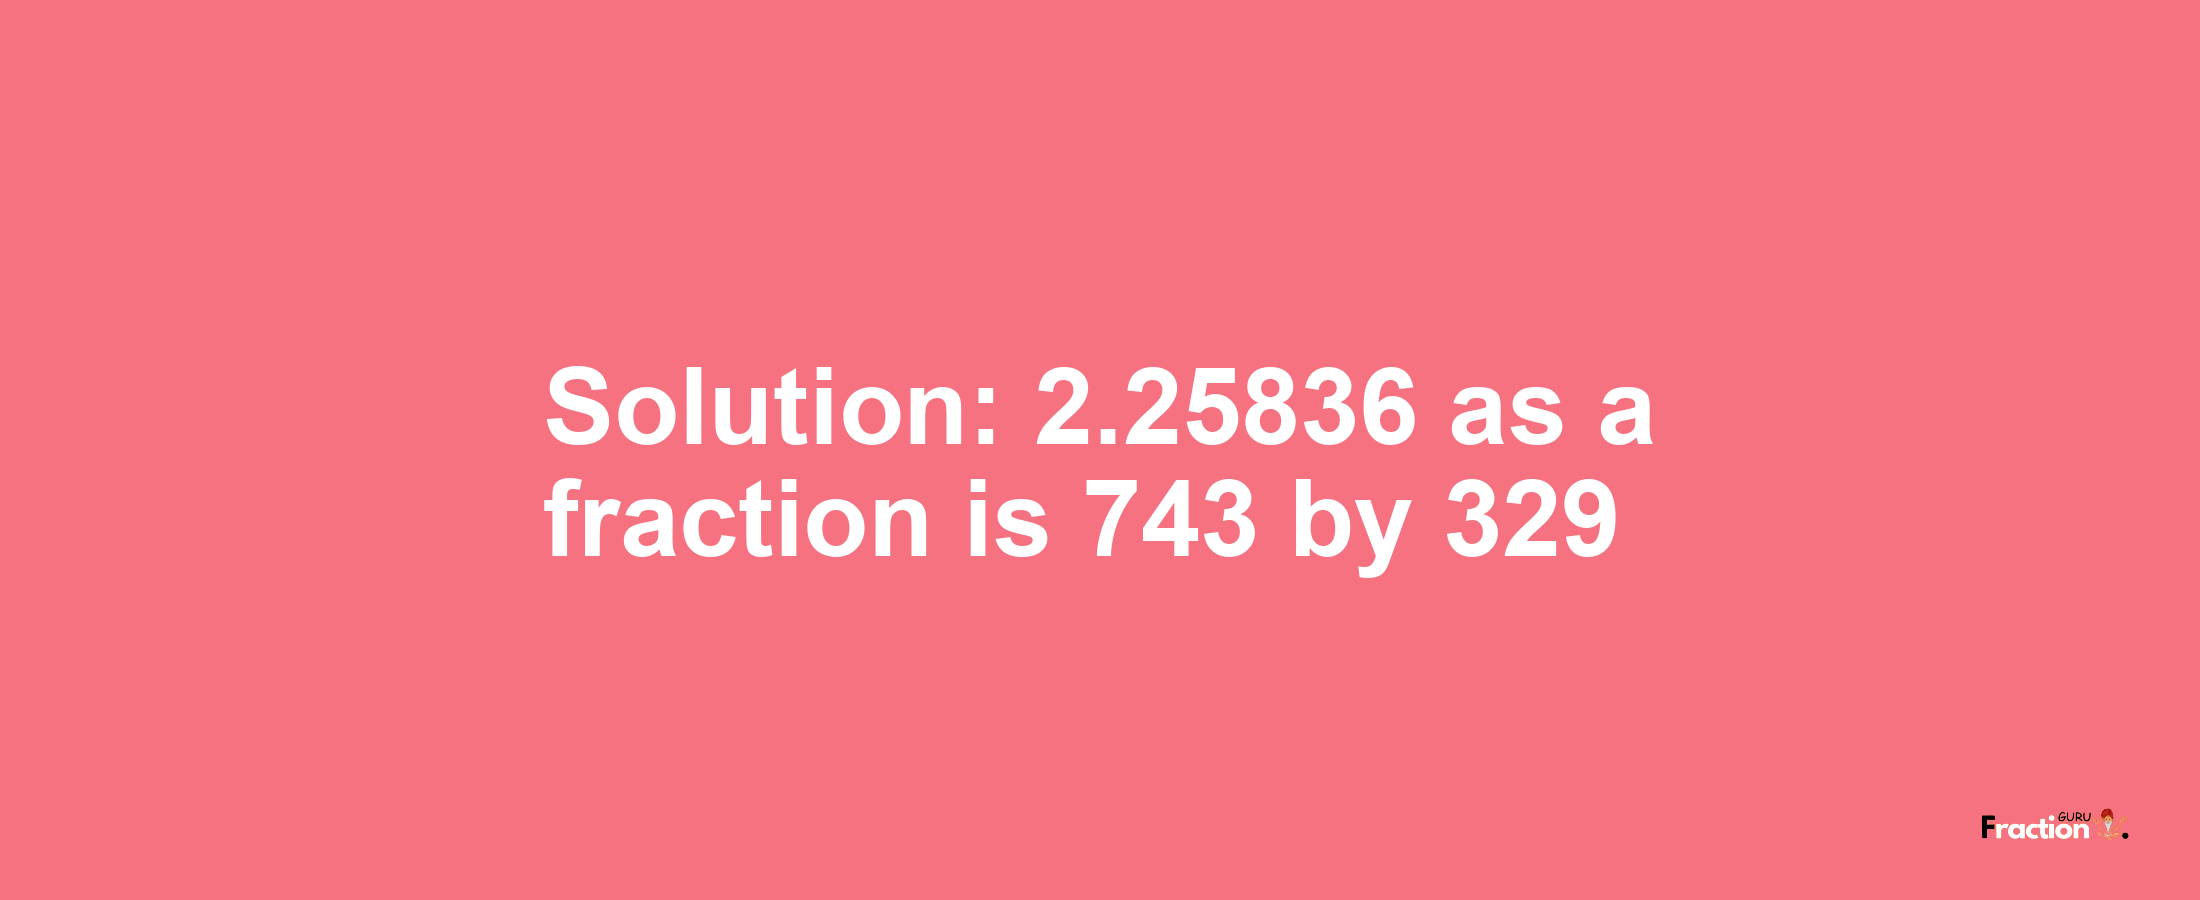 Solution:2.25836 as a fraction is 743/329